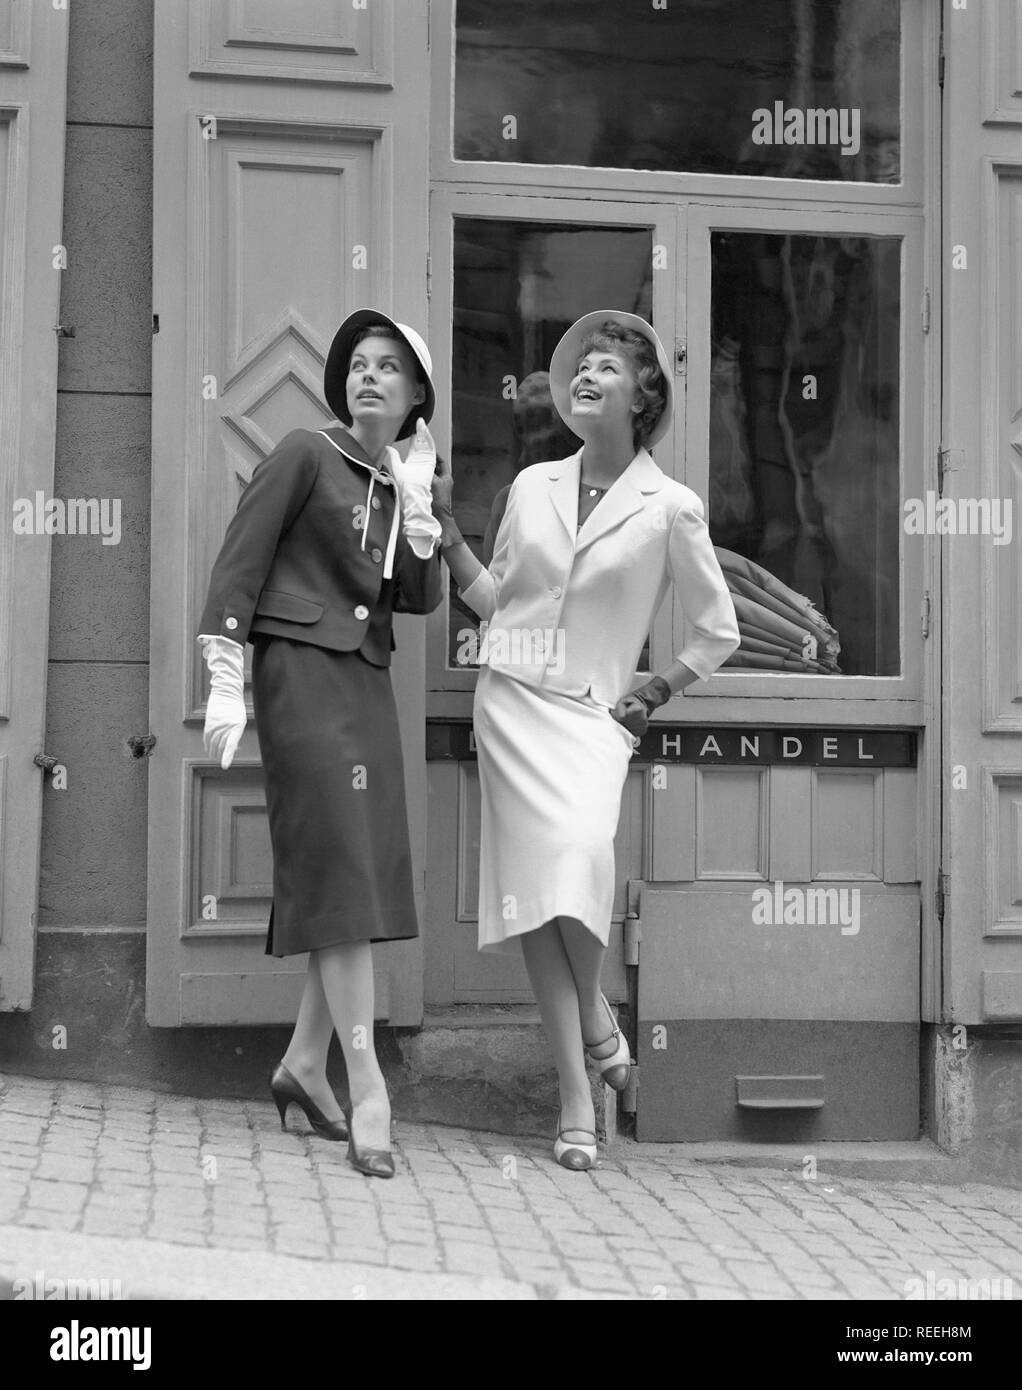 Fashionable in the 1950s. Two young woman wears  typical 1950s two piece dresses with matching skirts and jackets. Sweden 1950s. Photo Kristoffersson Ref 315A-11 Stock Photo